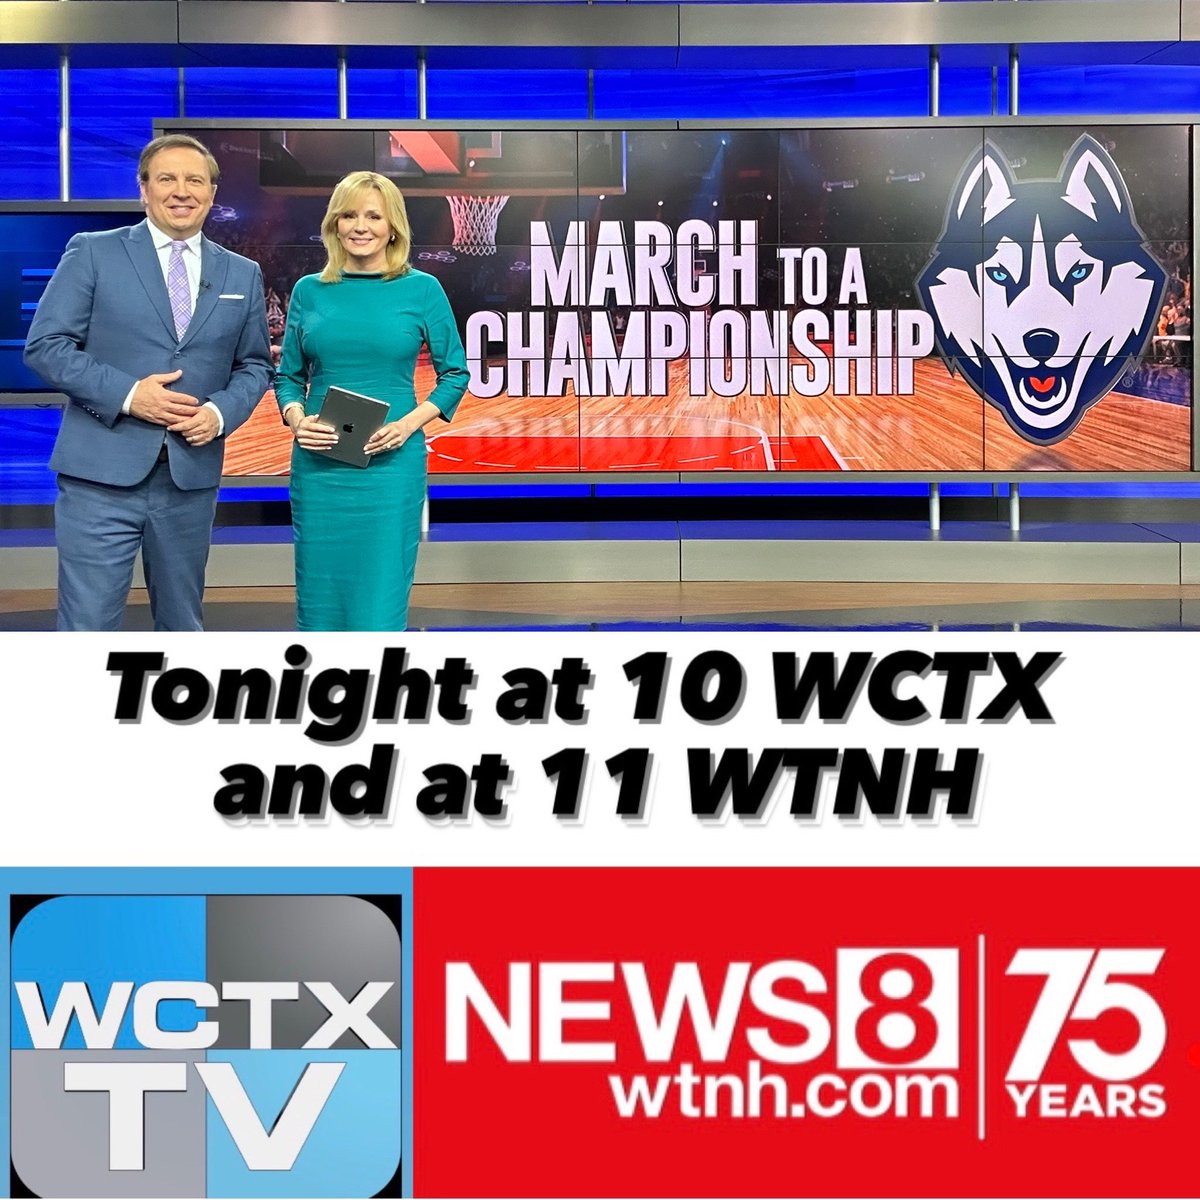 We take you to Phoenix and Cleveland tonight at 10 on WCTX and at 11 on WTNH, plus new information on a frightening vandalism attack, a rally over education and paying tribute to local firefighters.